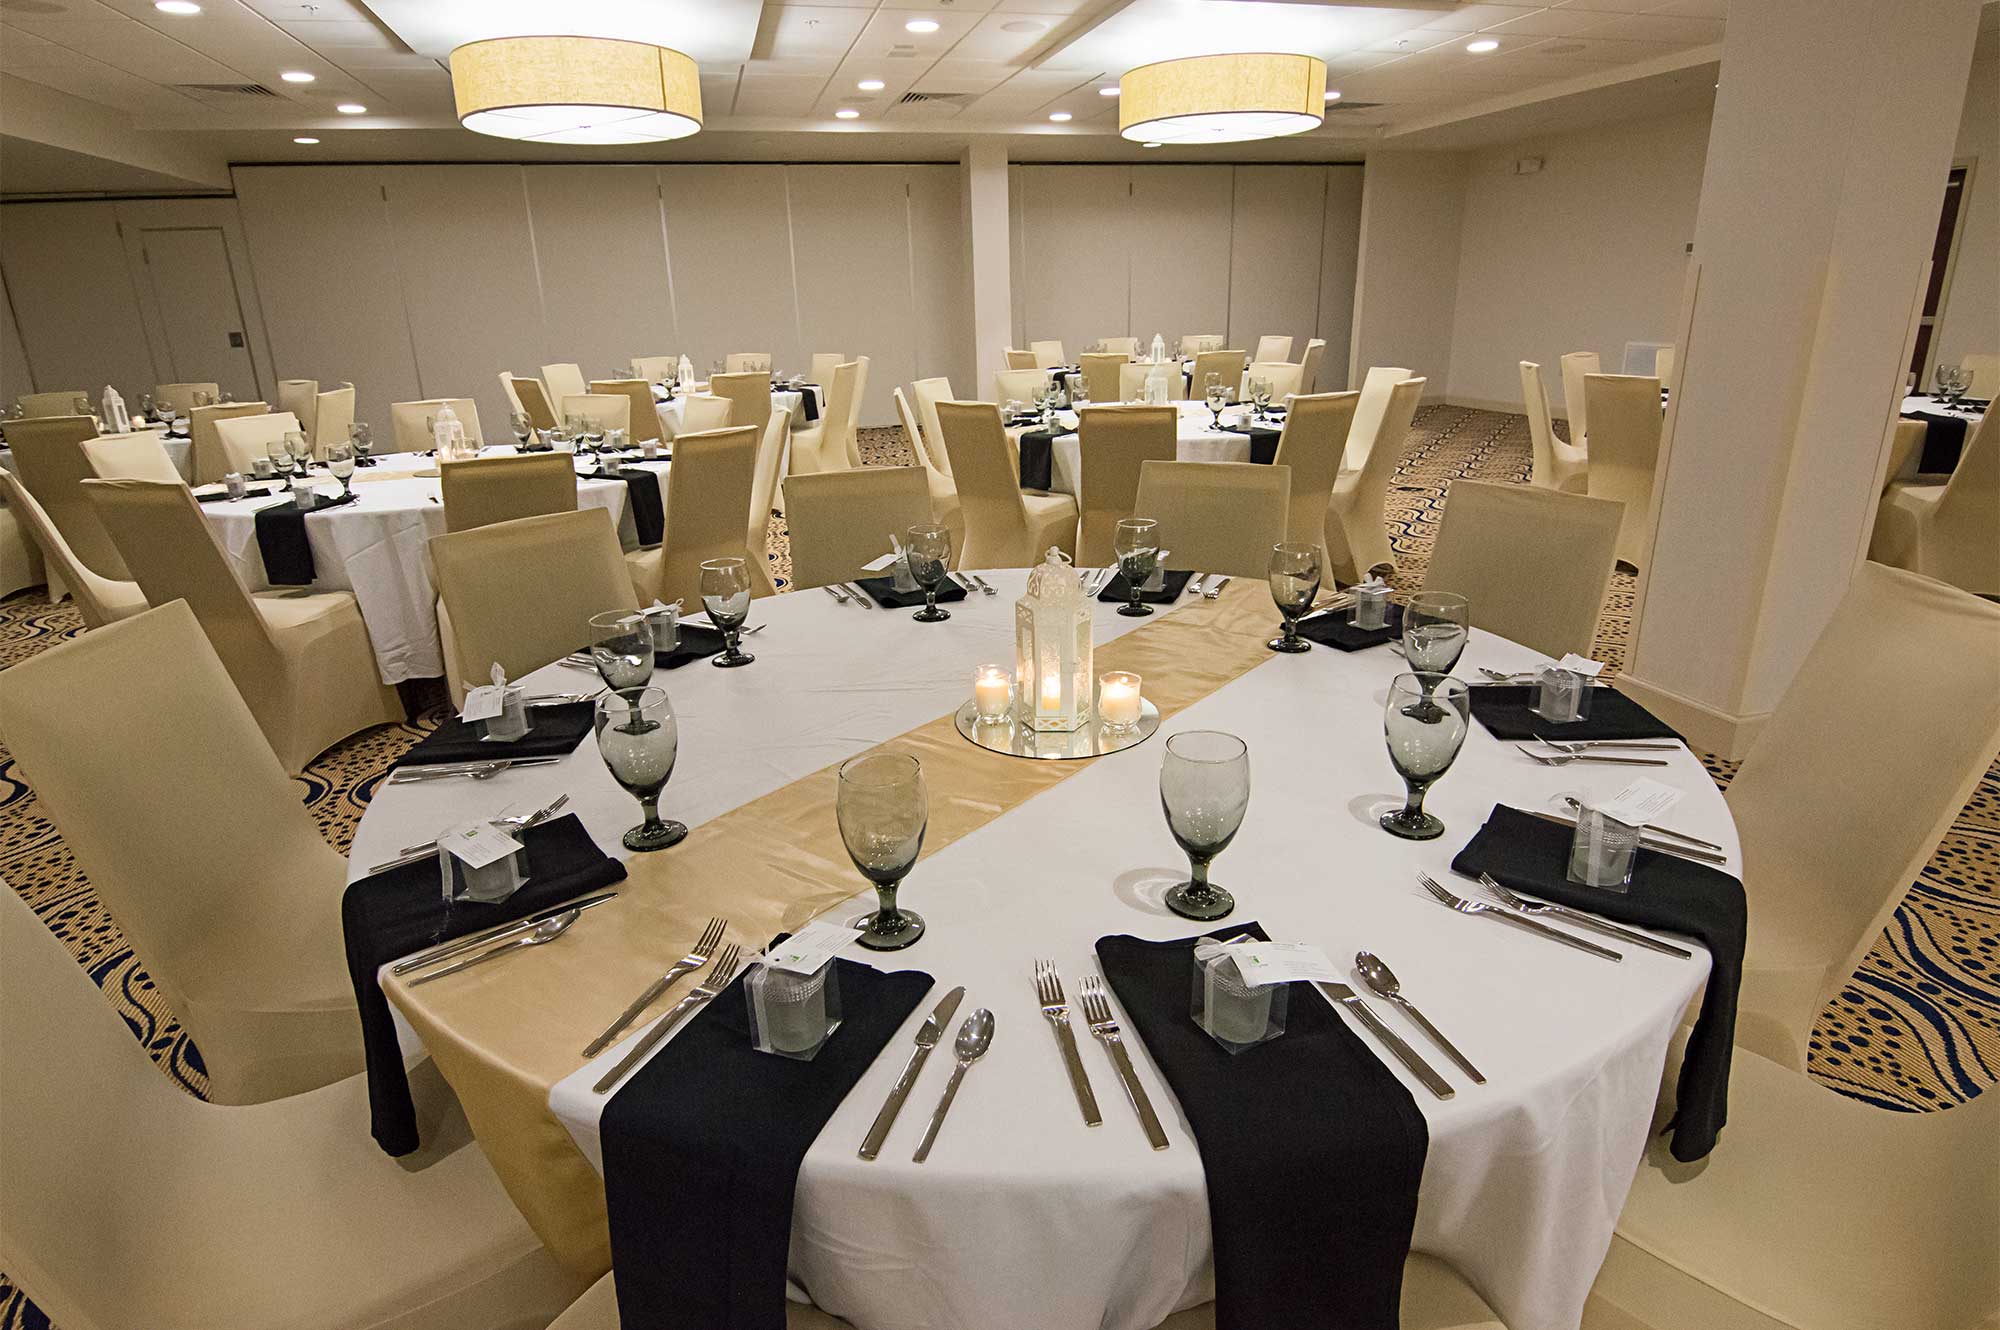 Flexible meeting space for receptions, banquets, parties